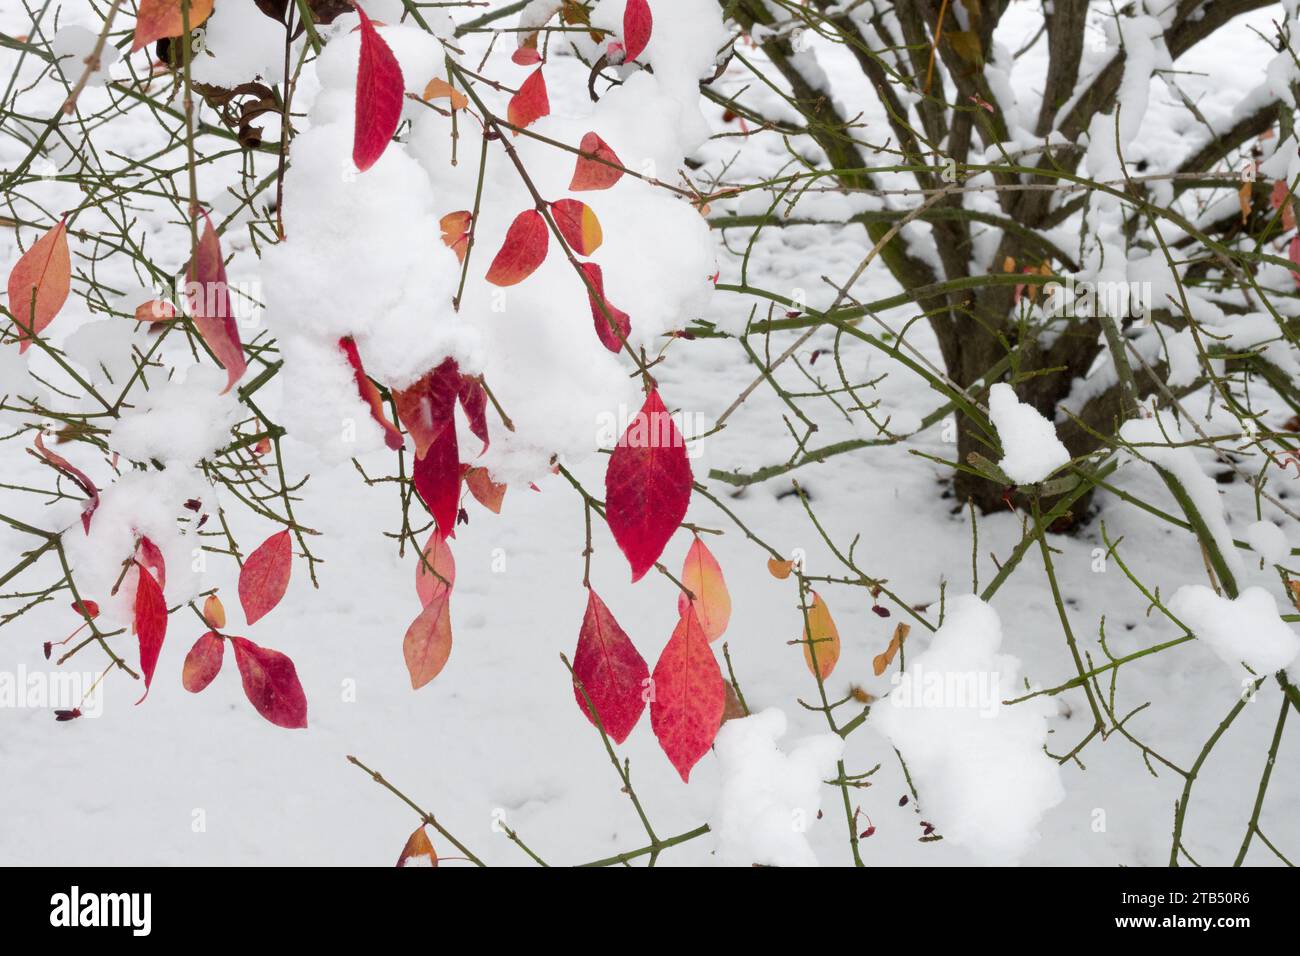 Winter, Euonymus alatus, Snow, Winged spindle, leaves Stock Photo